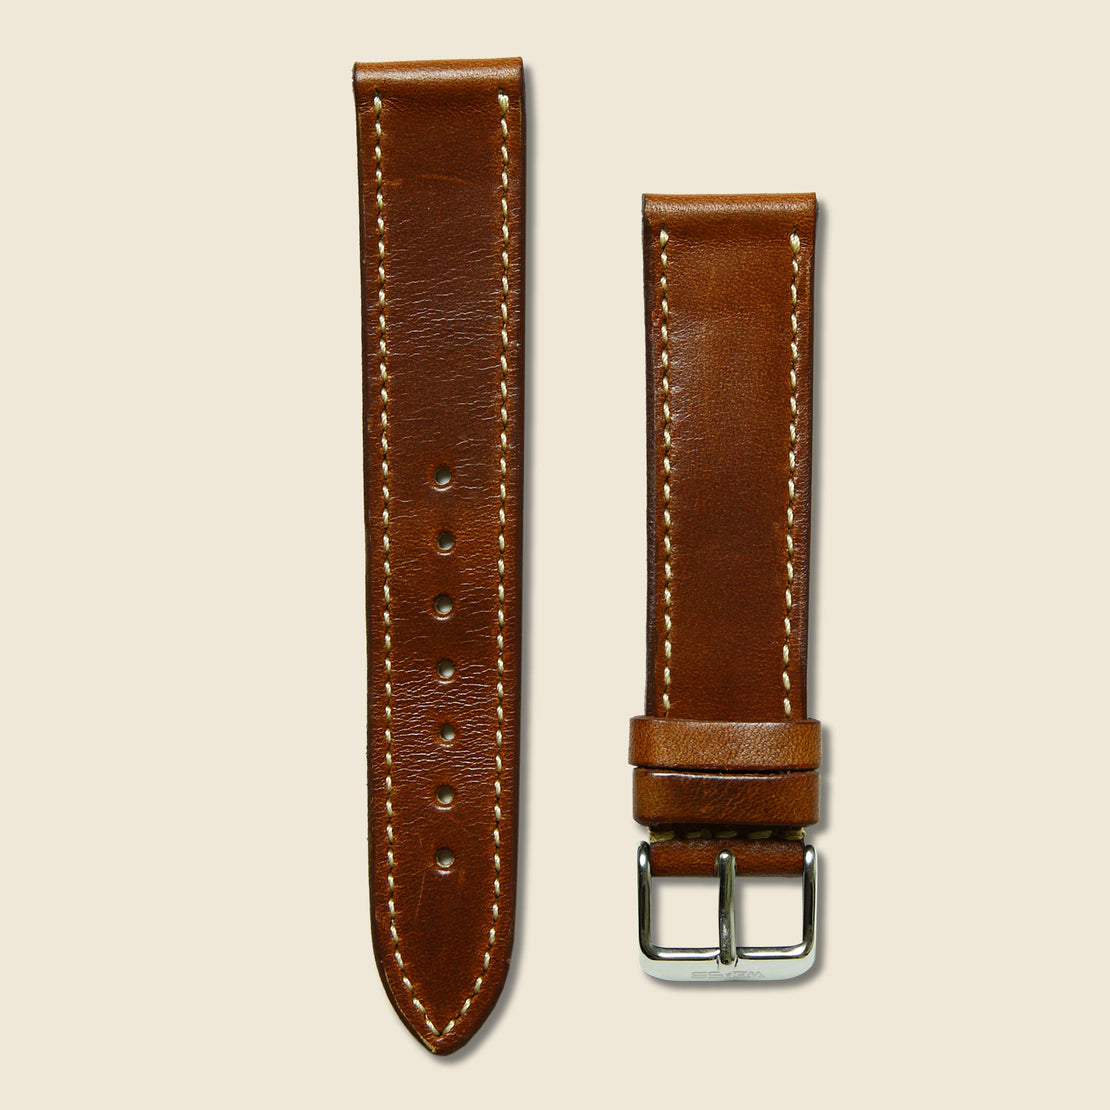 Weiss Watch Co Horween Leather Watch Band - Natural